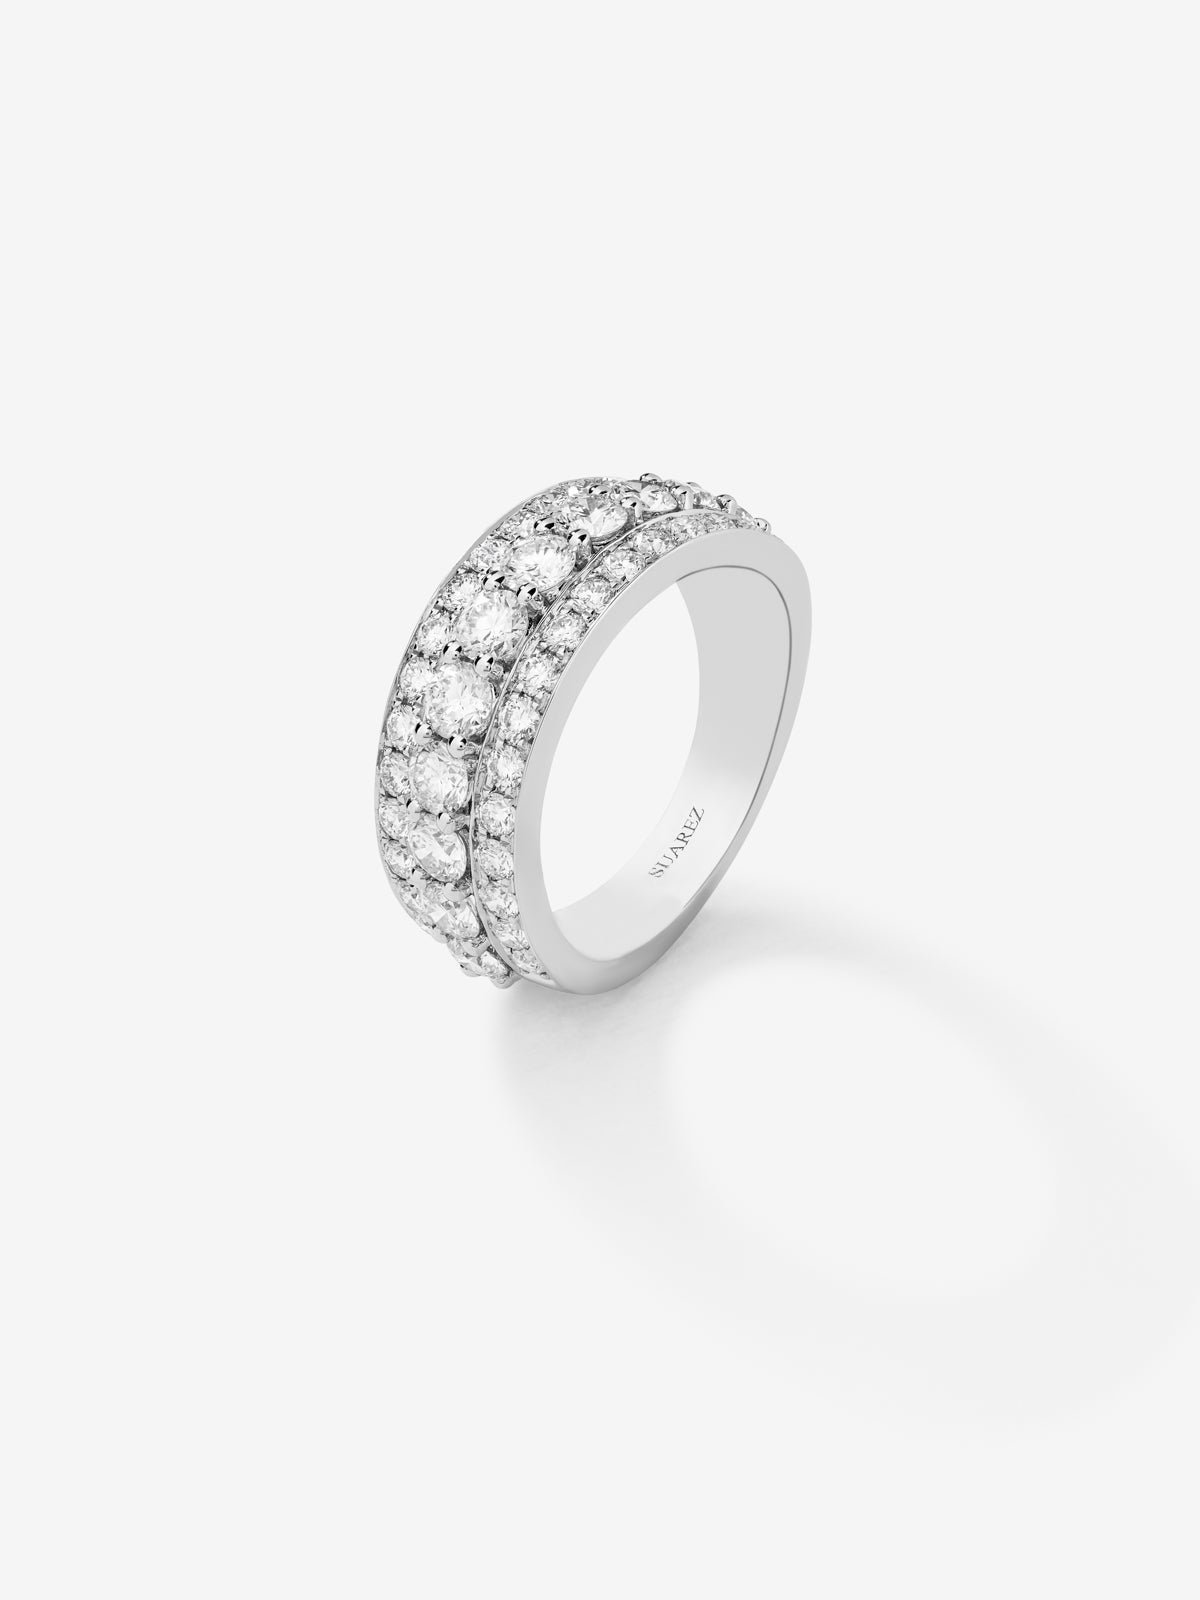 18K white gold ring with 43 brilliant-cut diamonds with a total of 1.97 cts